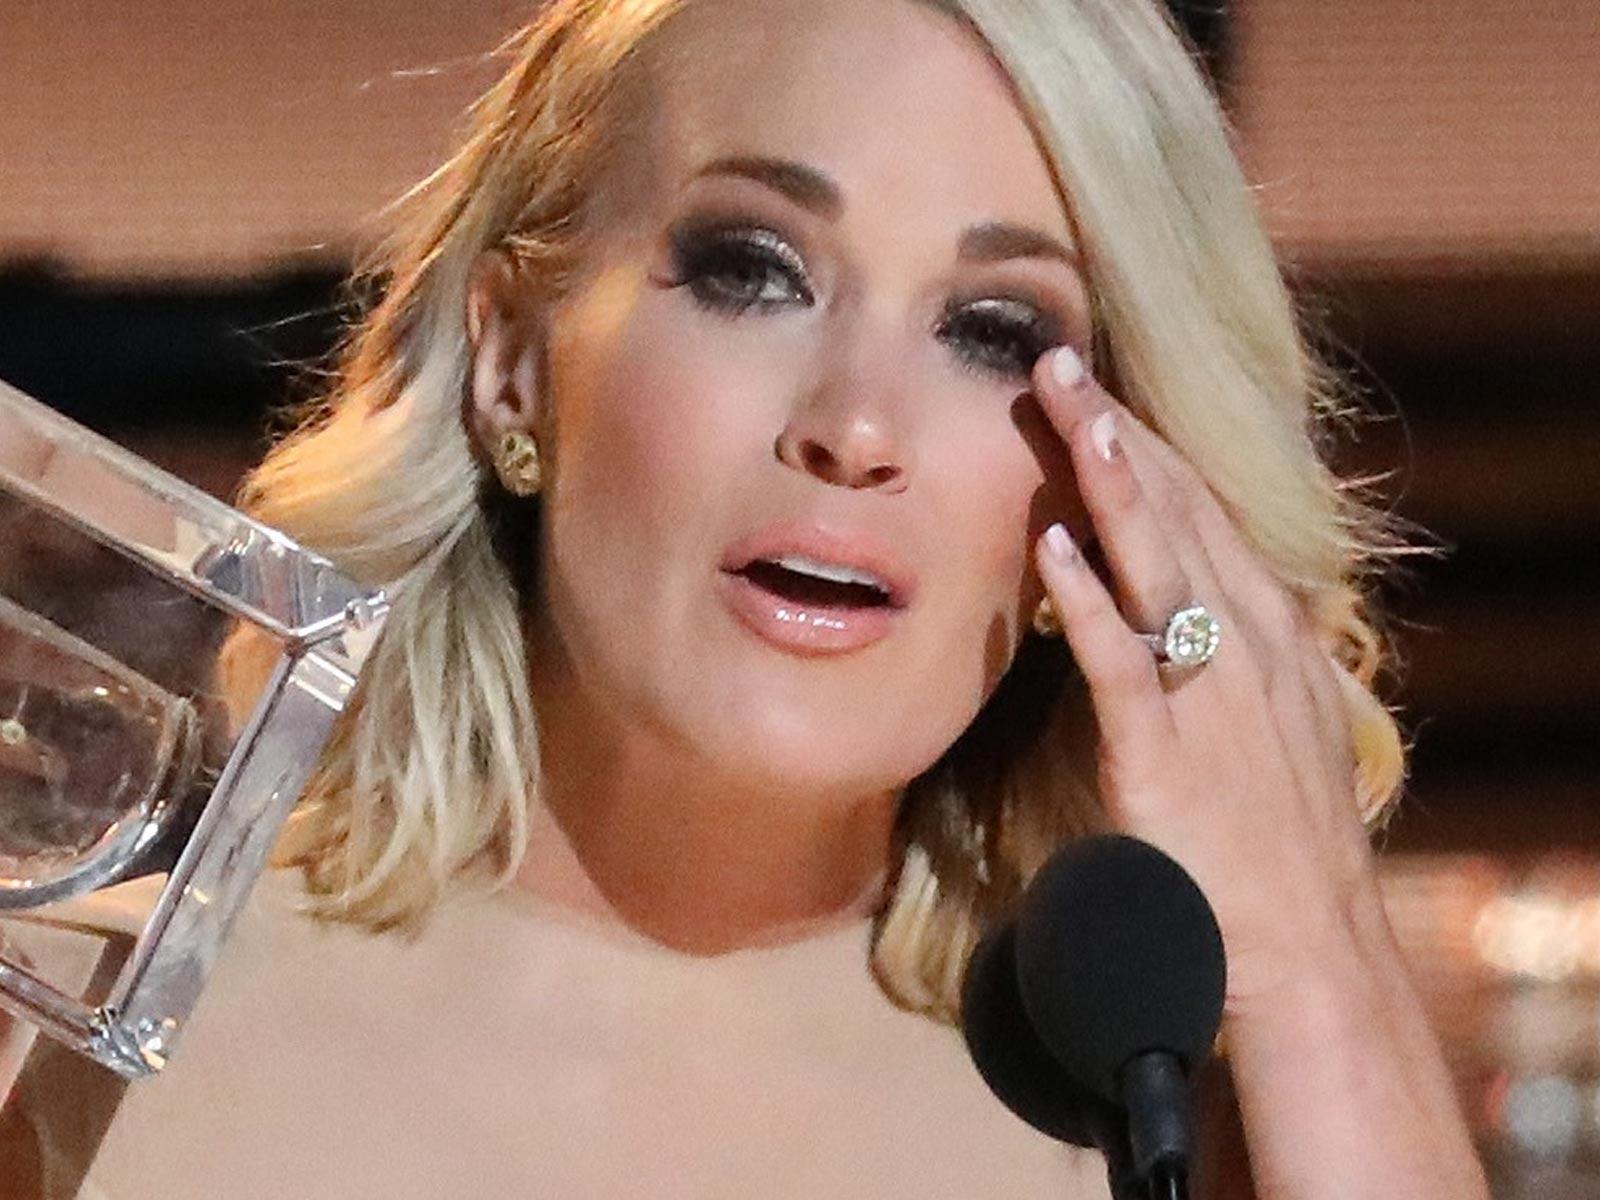 Carrie Underwood Sued, ‘Something in the Water’ Is Pretty Fishy